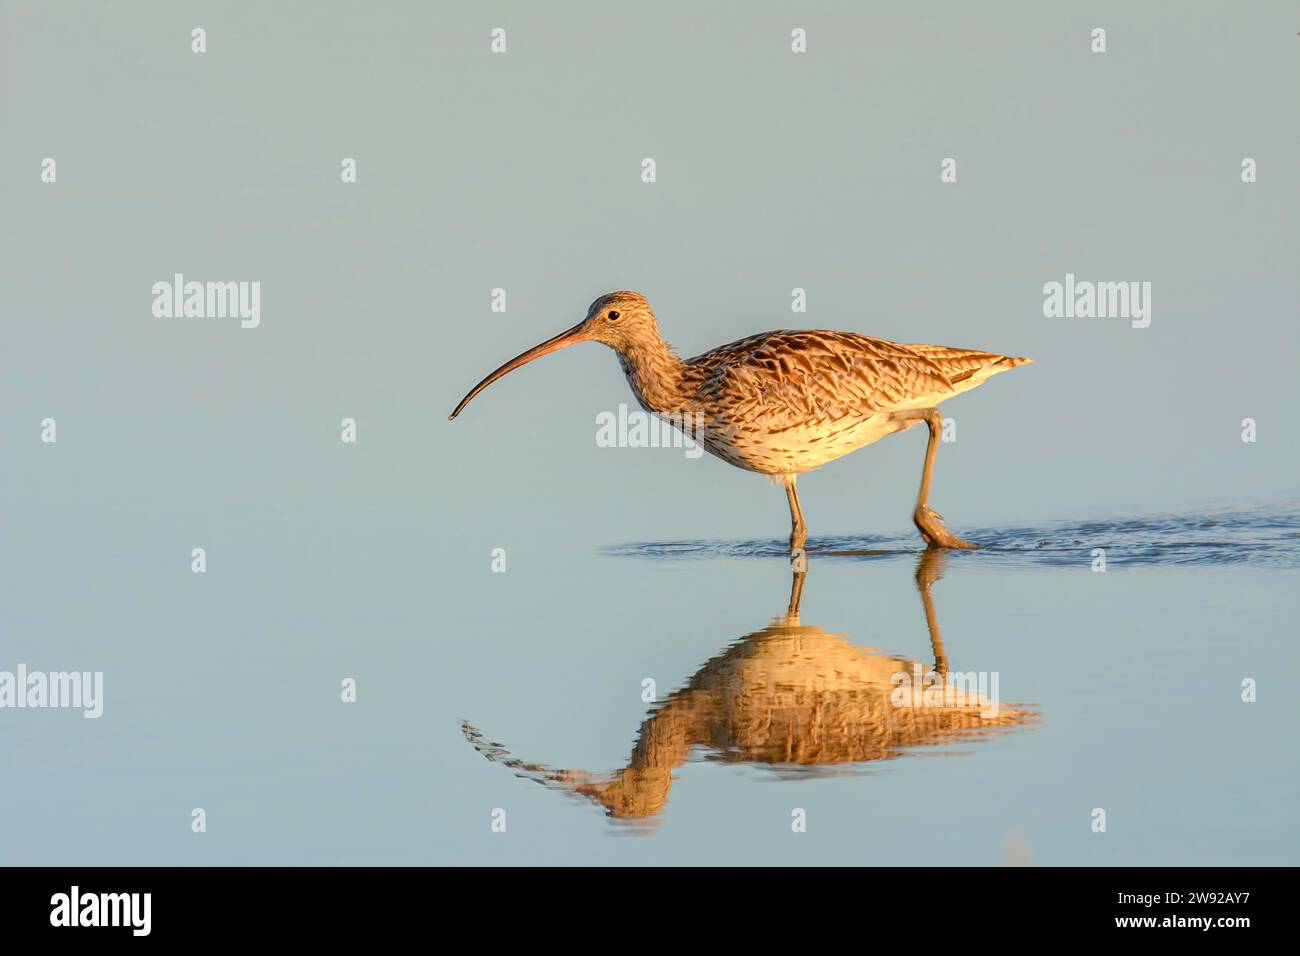 A shorebird wading in calm water with its reflection visible during golden hour Stock Photo